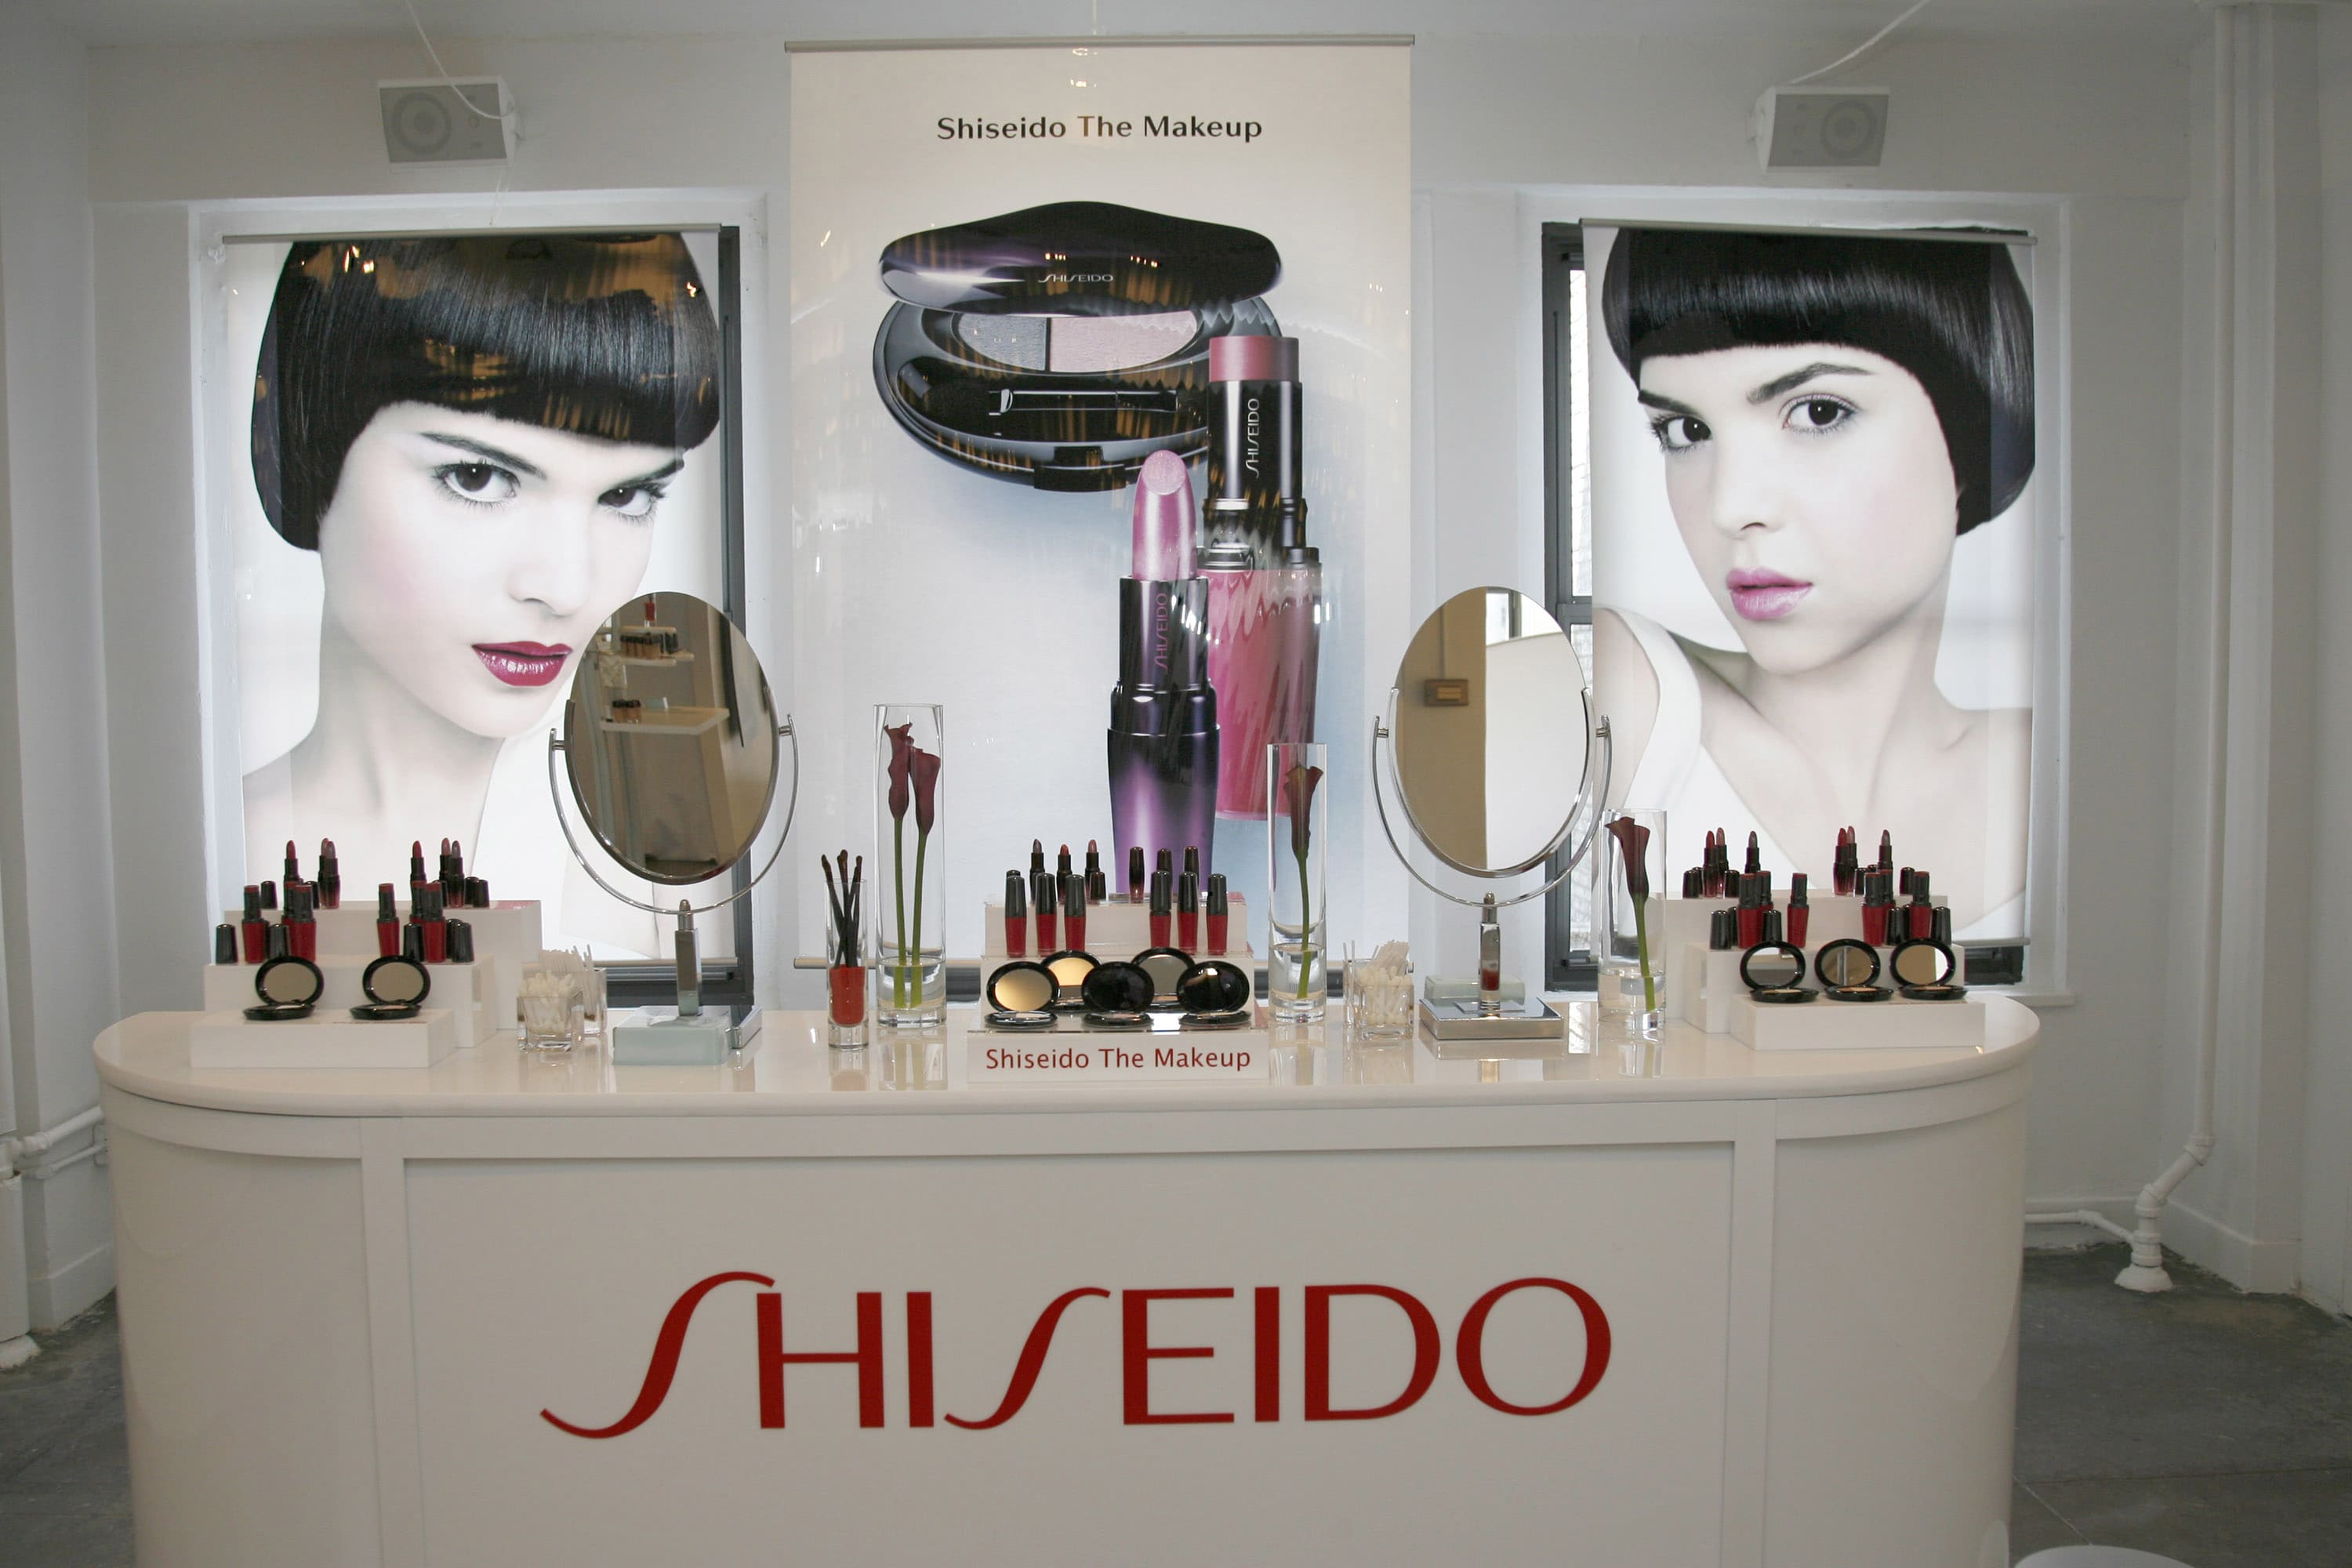 Shiseido to sell personal care business to CVC in a $ 1.5 billion deal